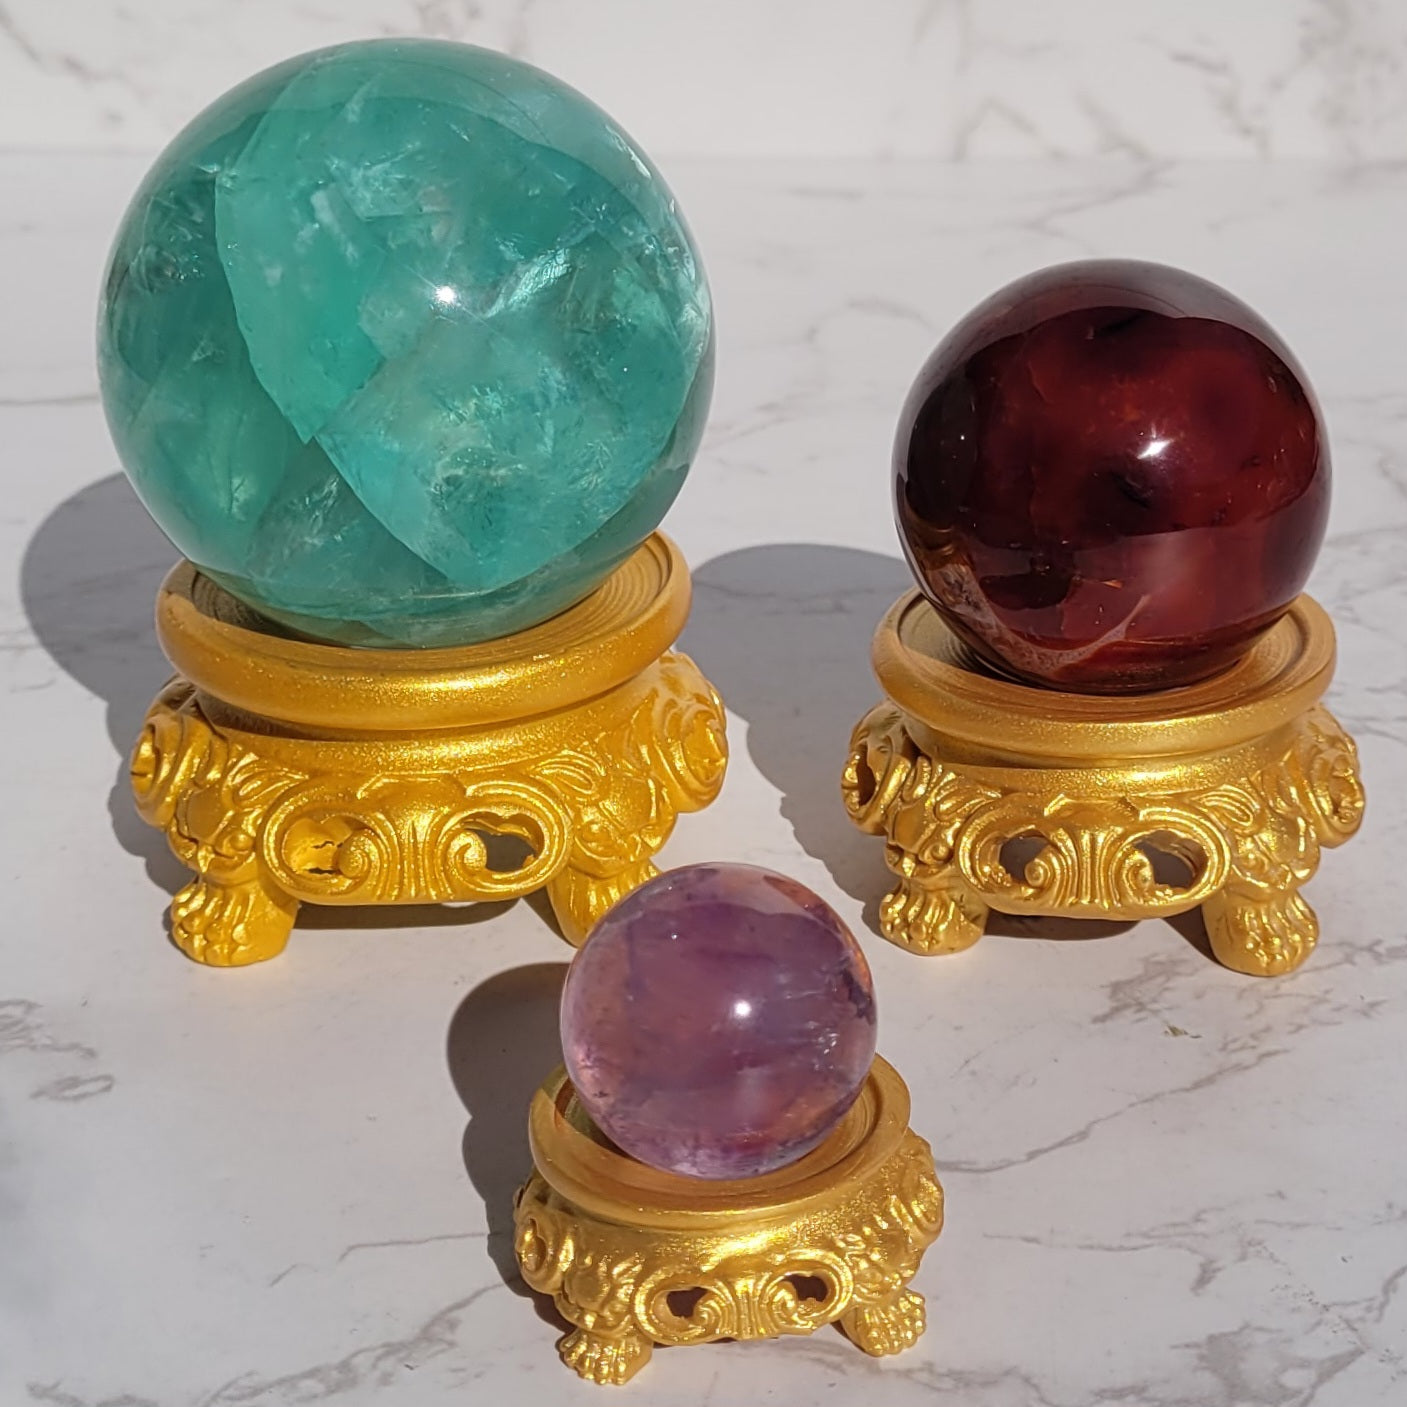 Fancy Gold Sphere Display Stands in 4 Sizes, for Crystal Balls 1.9" to 4.7" (47mm to 120mm)